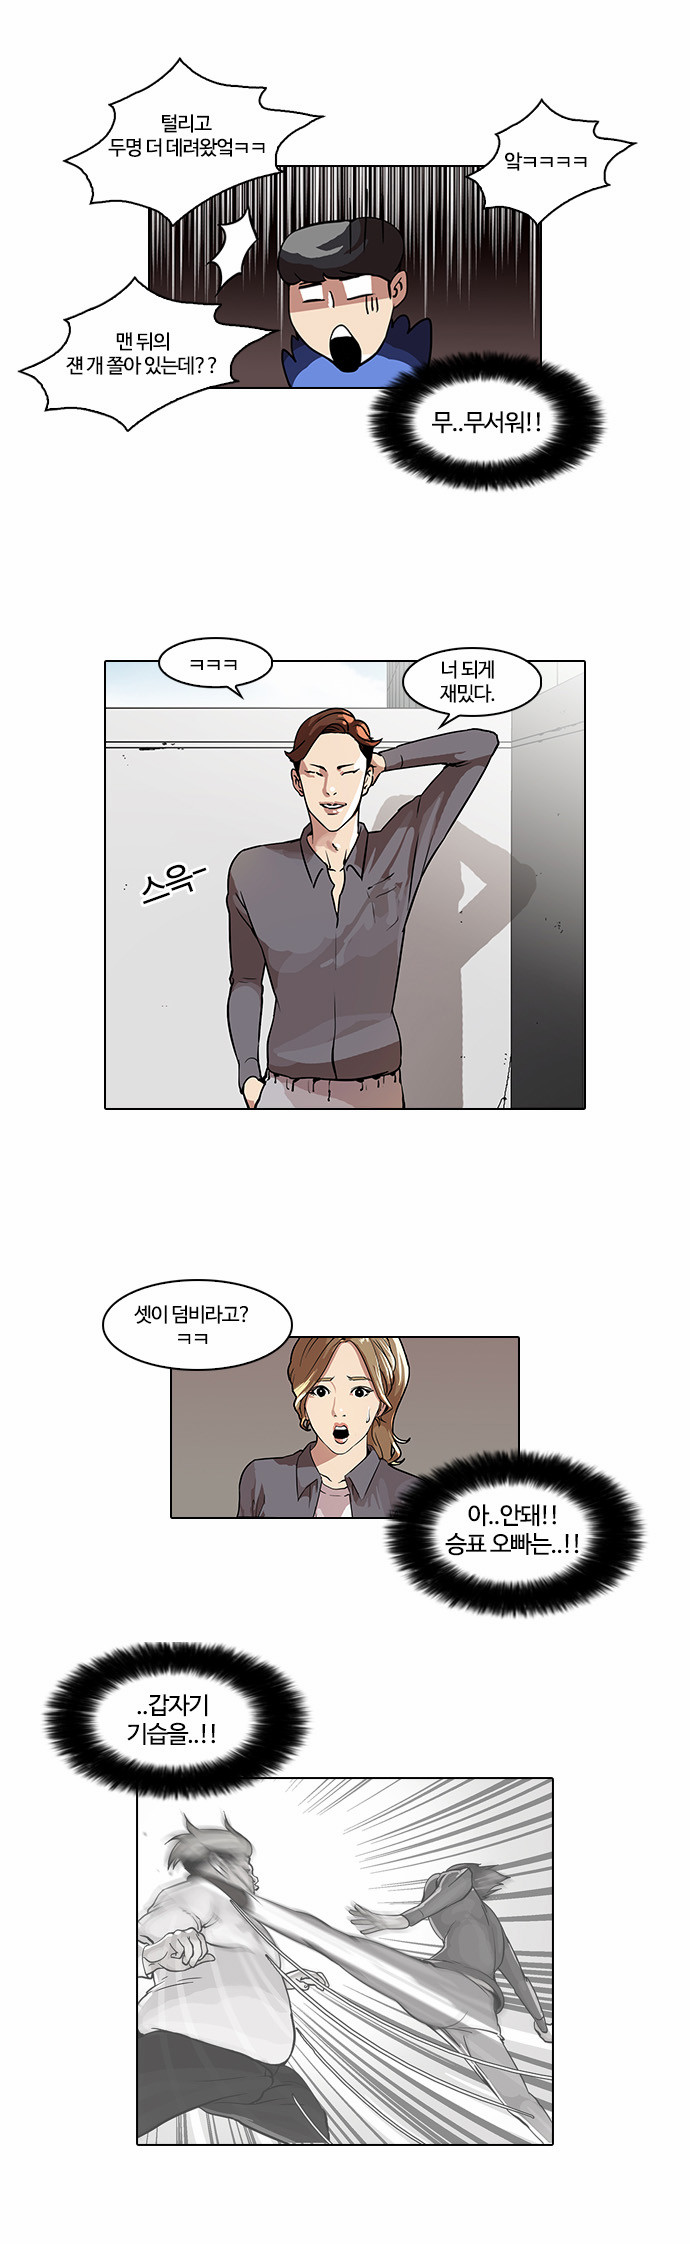 Lookism - Chapter 37 - Page 2